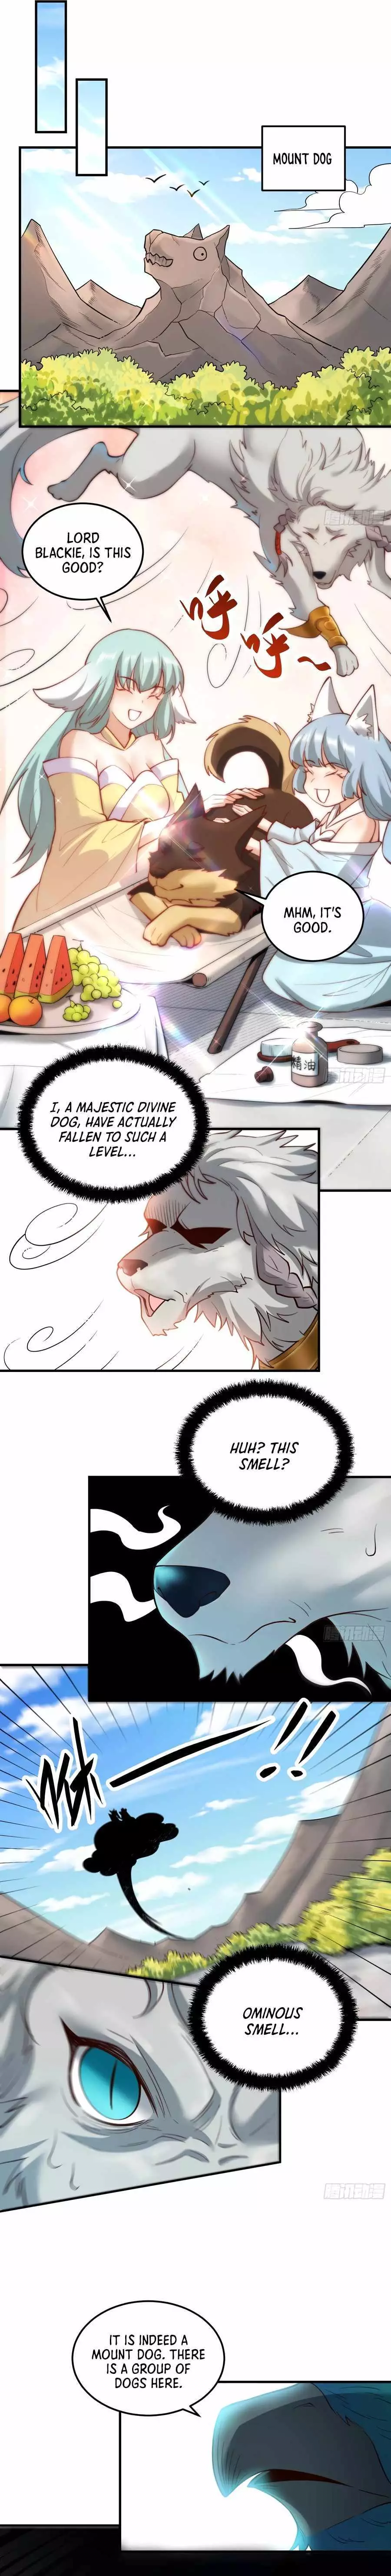 I’M Actually A Cultivation Bigshot - 352 page 9-2fe3eee4